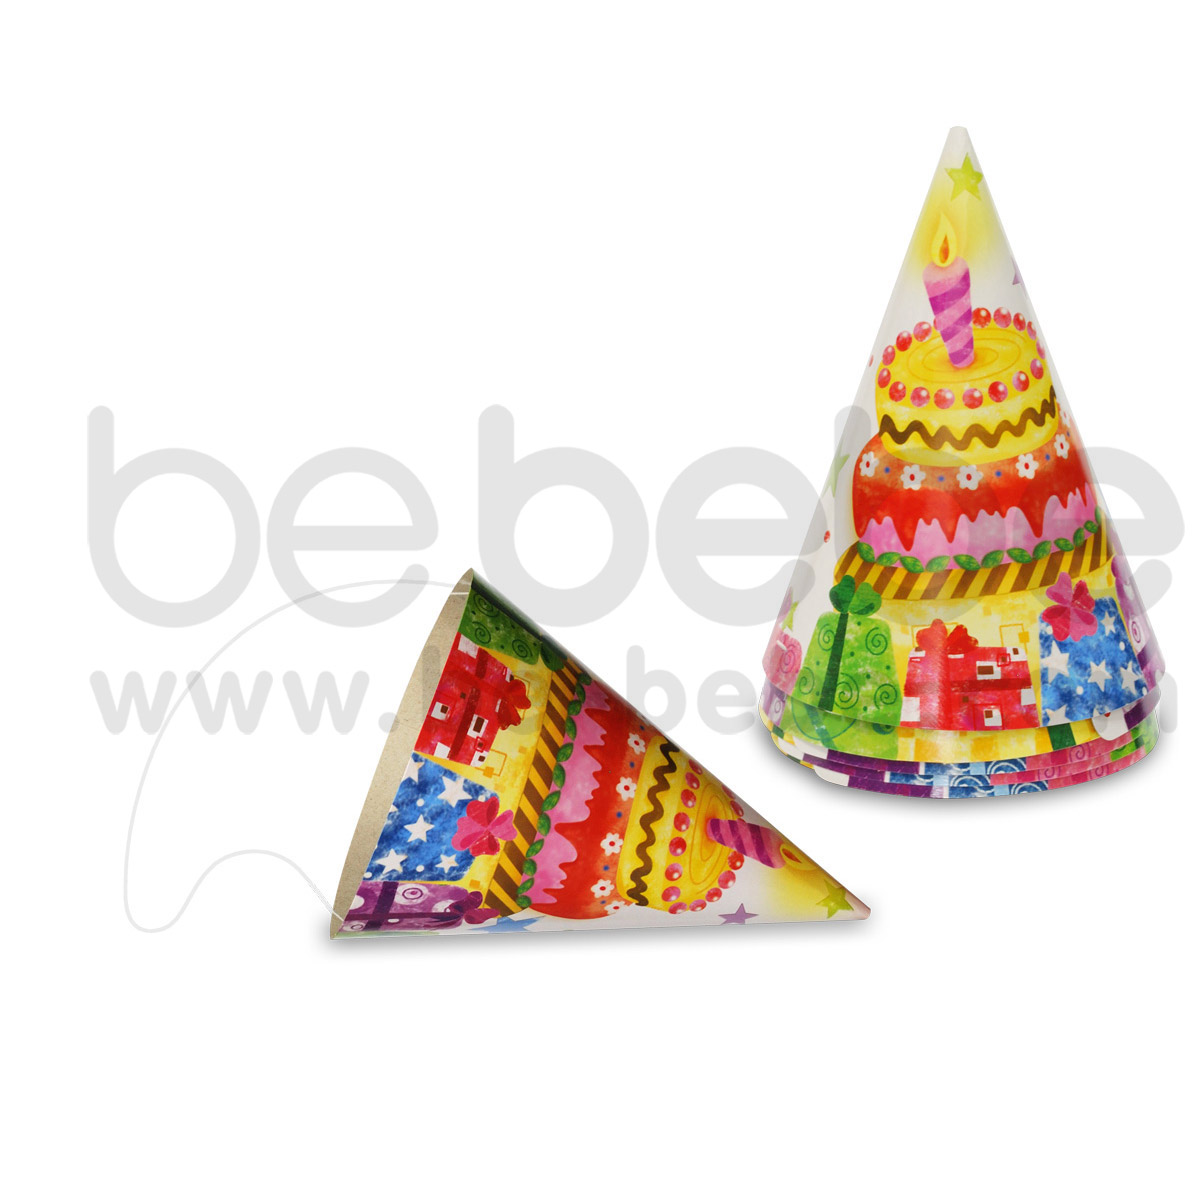 PARTY BUG : Cone hat 6 inch., 6 Packs